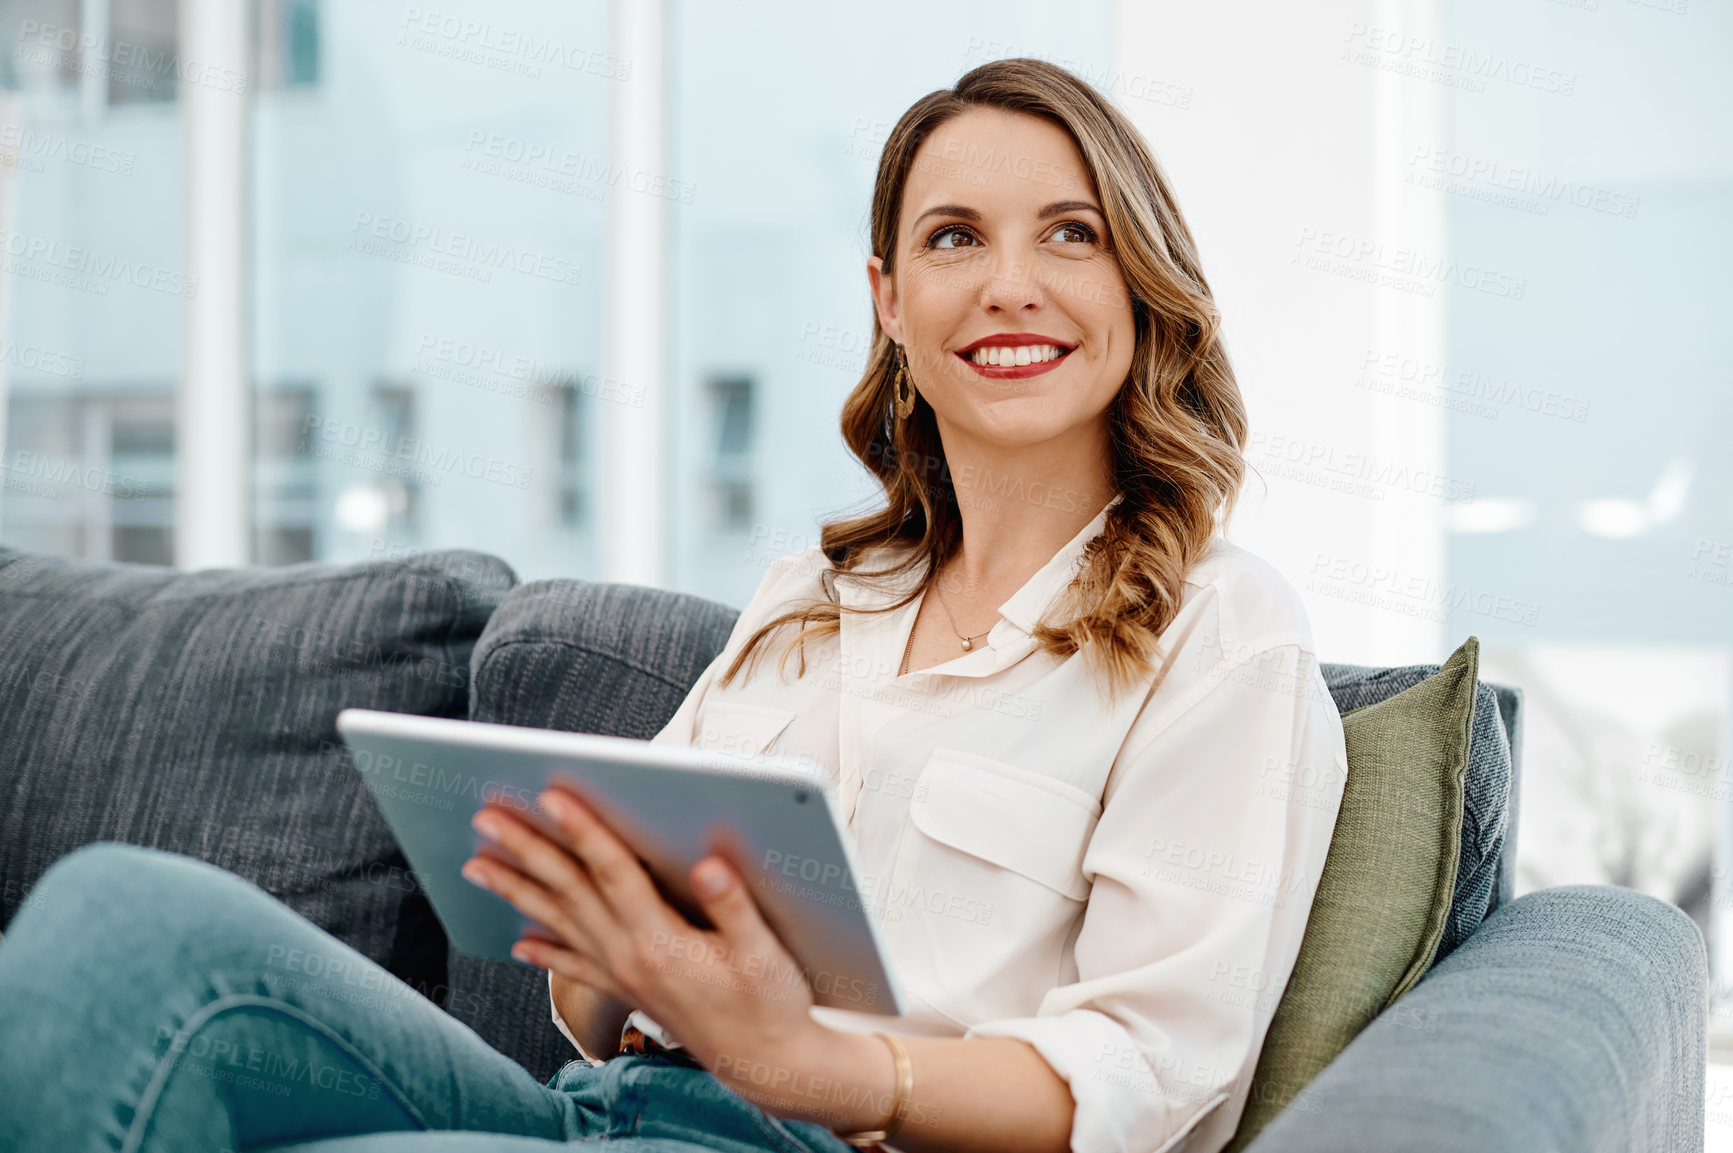 Buy stock photo Portrait of an attractive young businesswoman using a digital tablet while sitting on a sofa inside her office